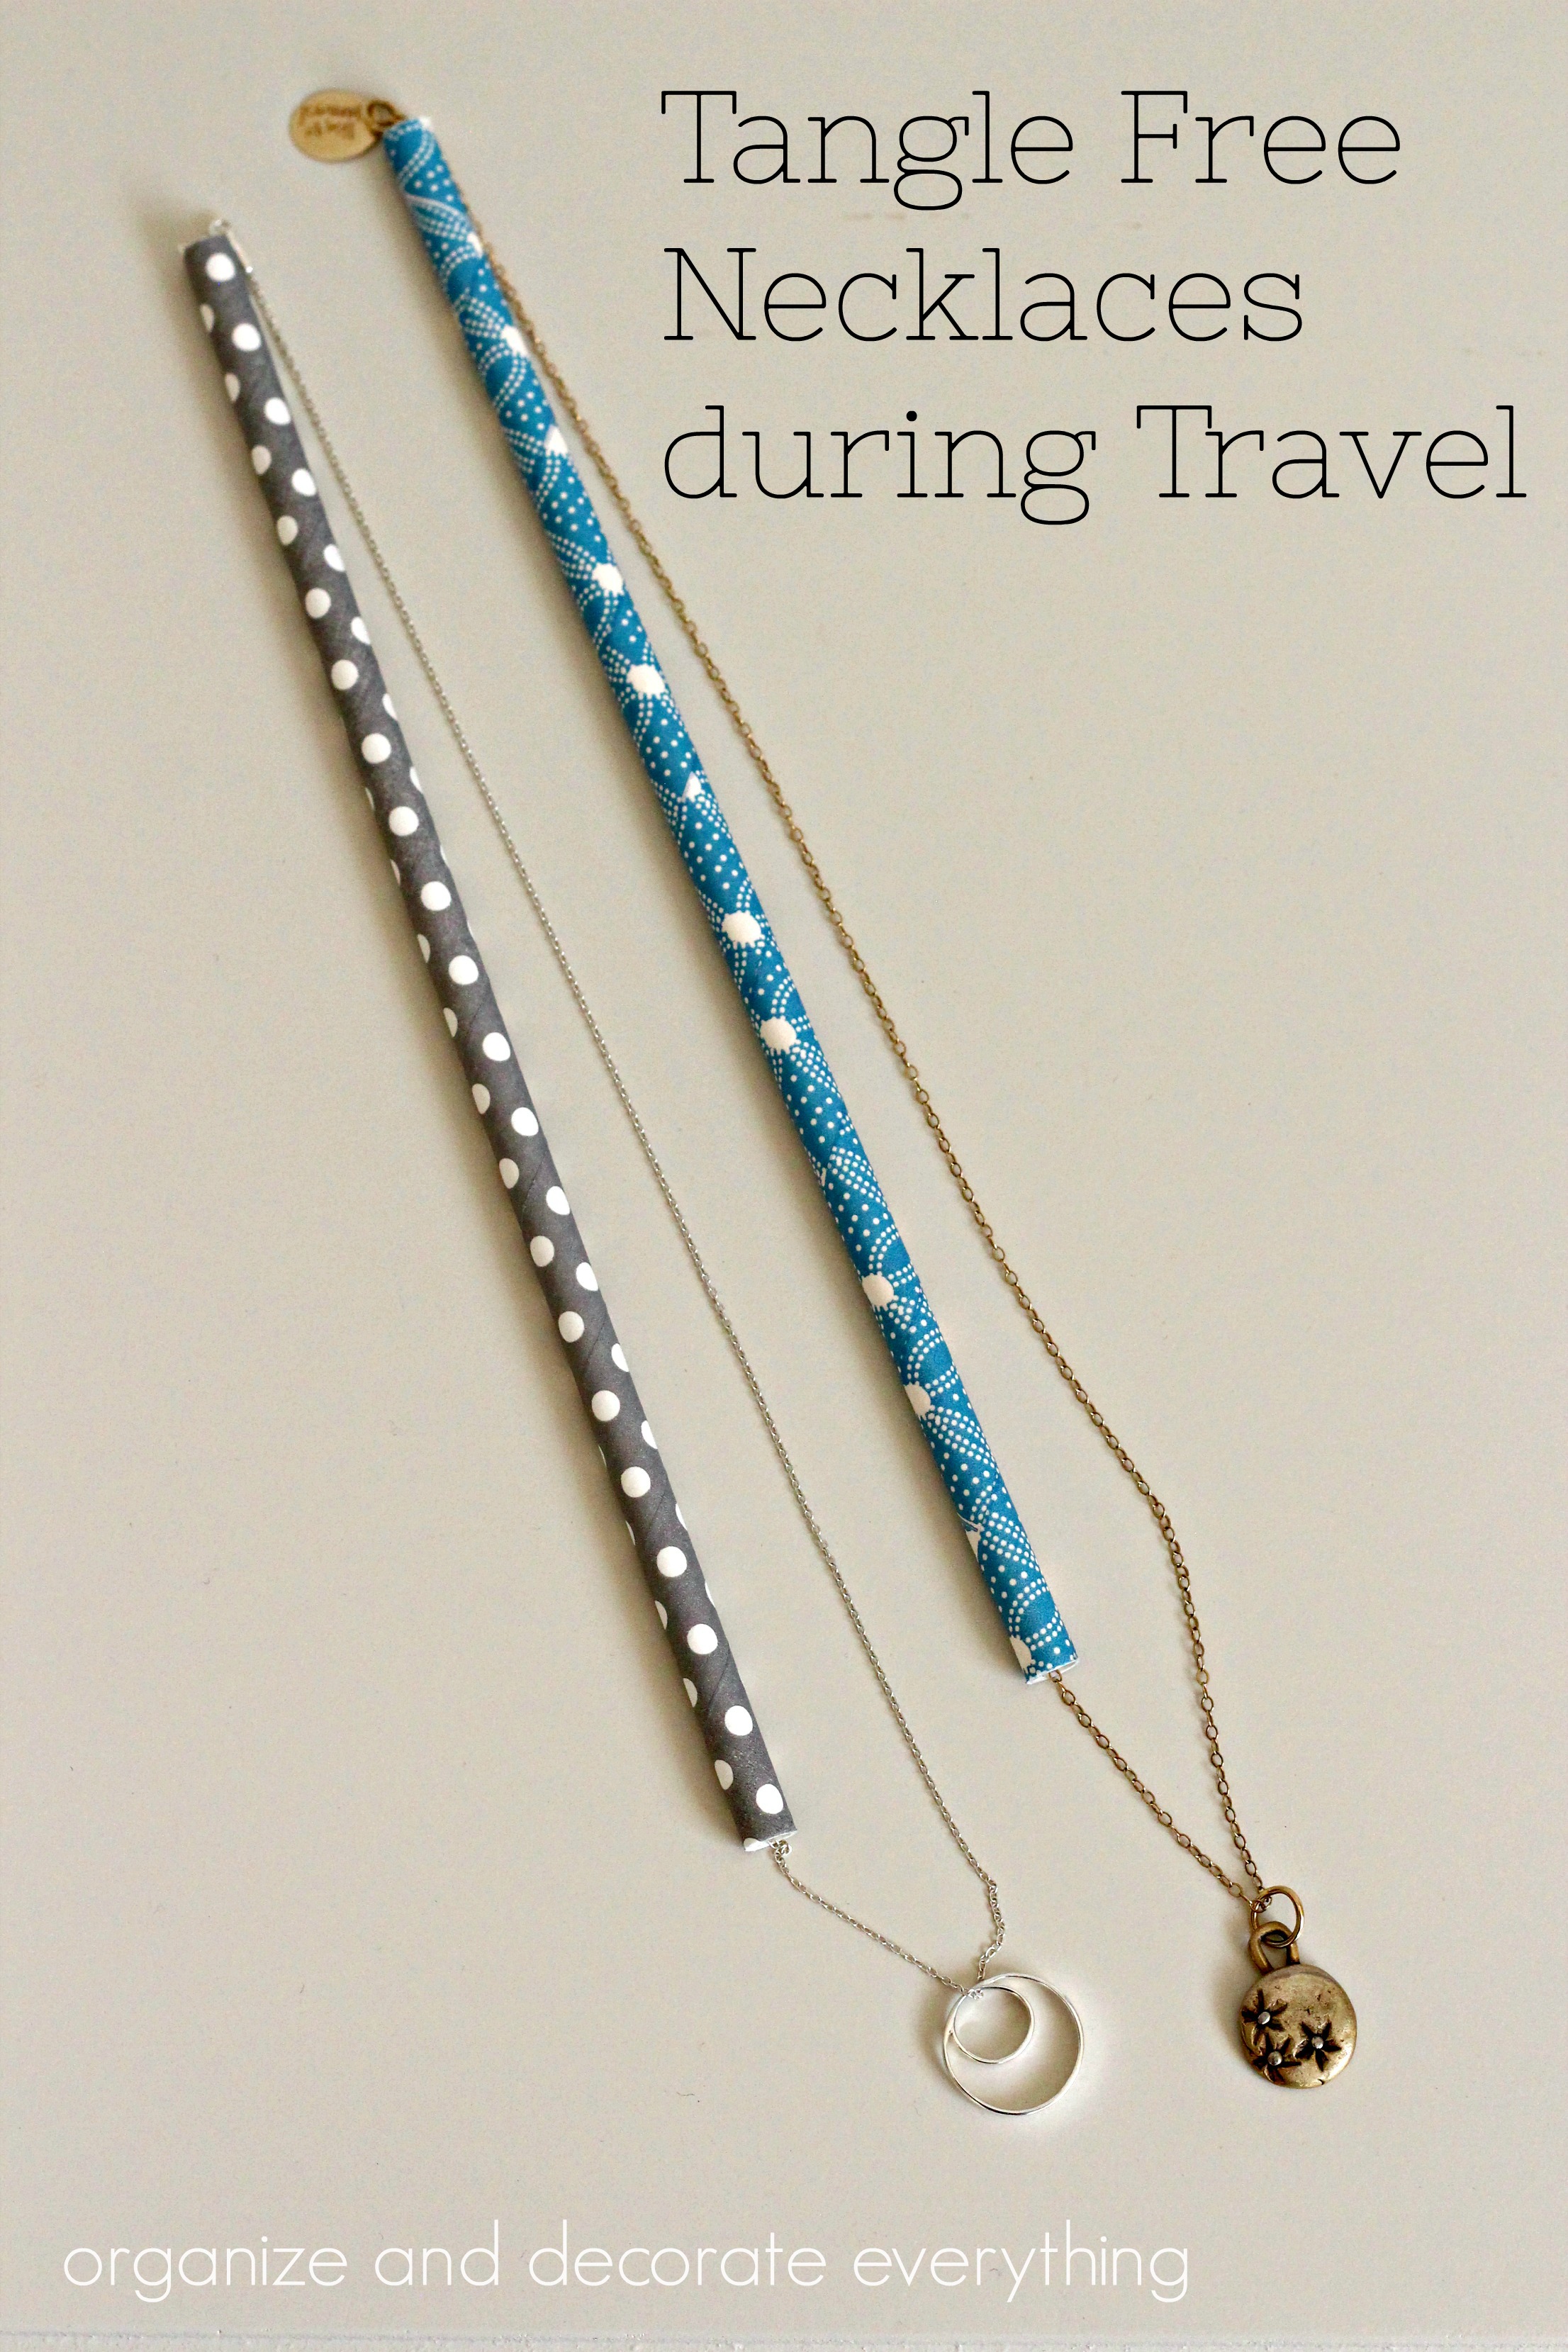 Tangle Free Necklaces during Travel - 31 Days of Organizing and Cleaning  Hacks - Organize and Decorate Everything